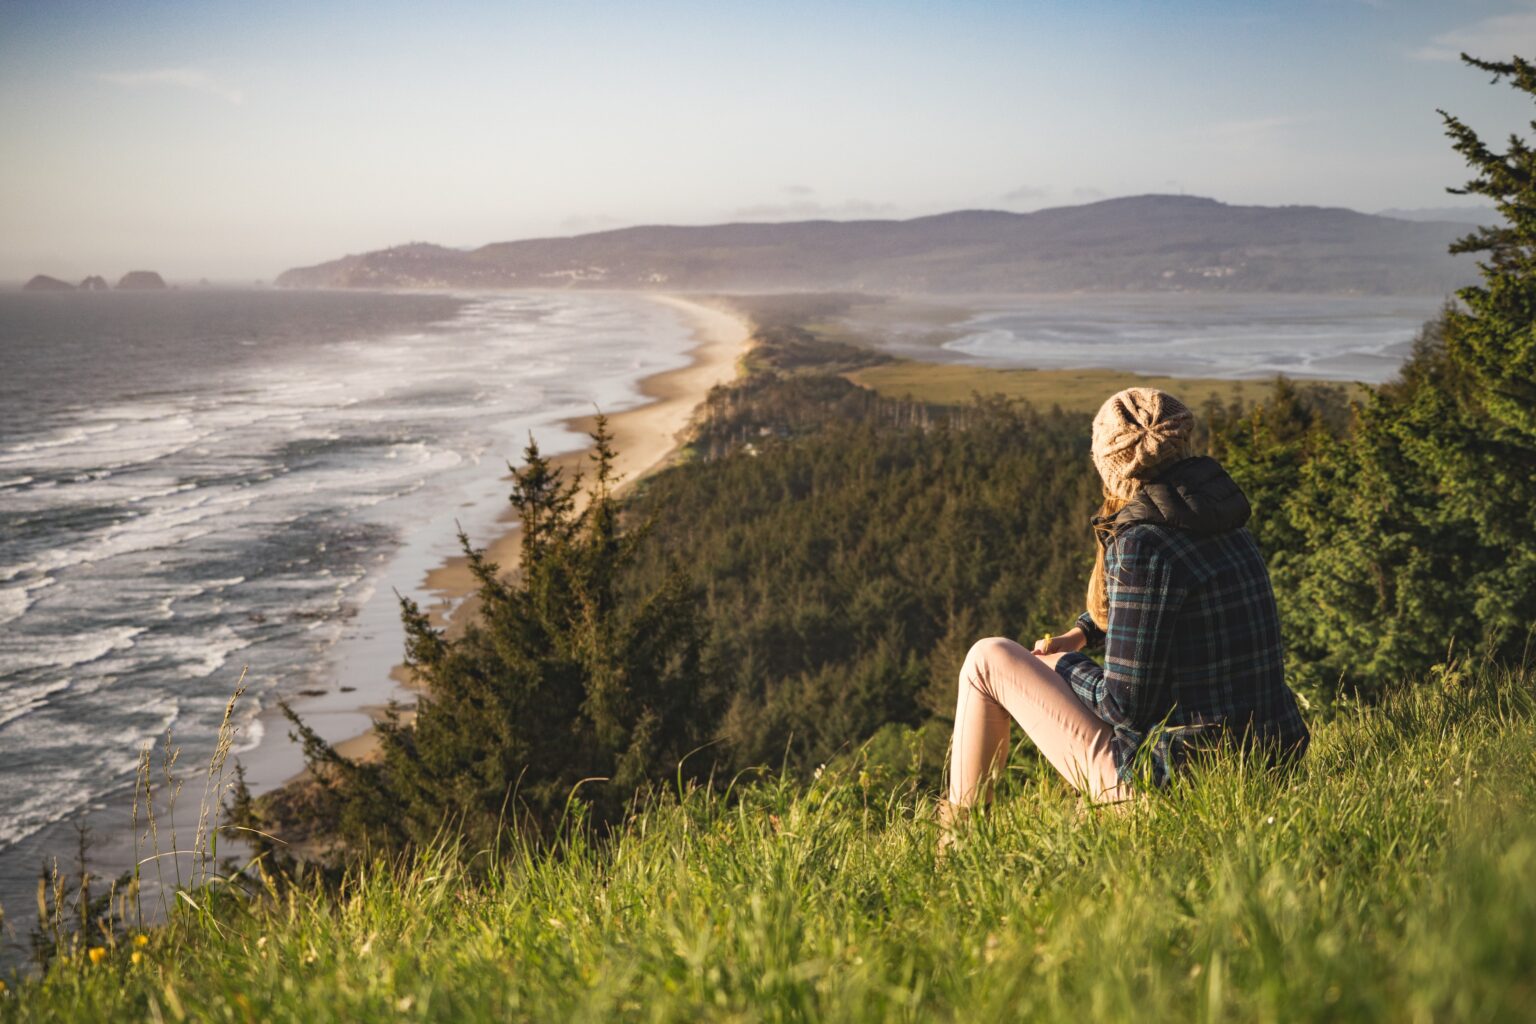 person sitting on hill near ocean during daytime